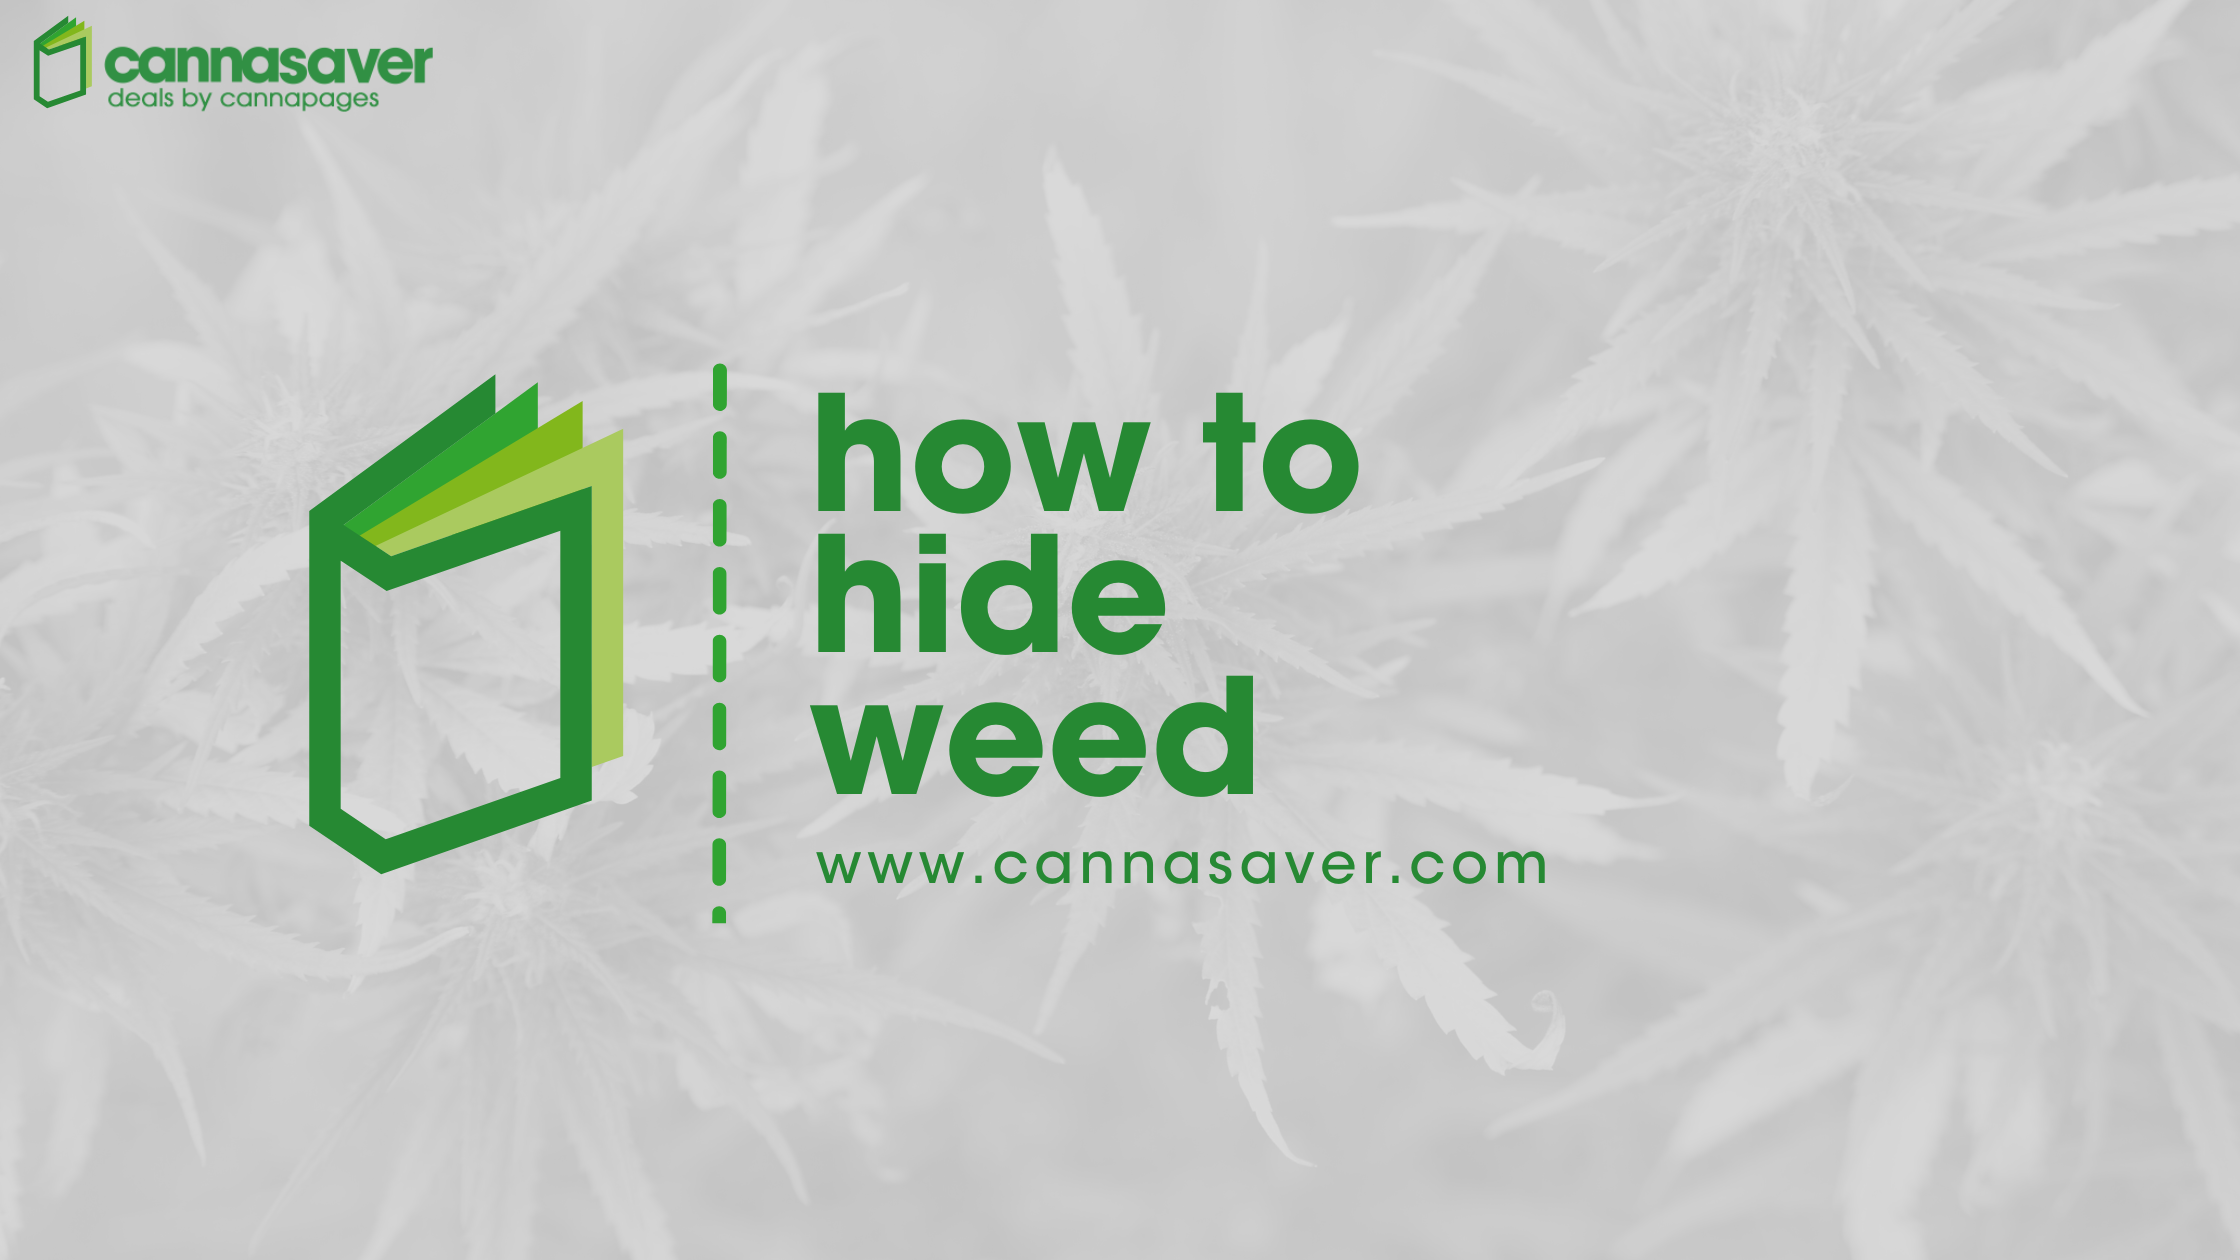 How to Hide Weed